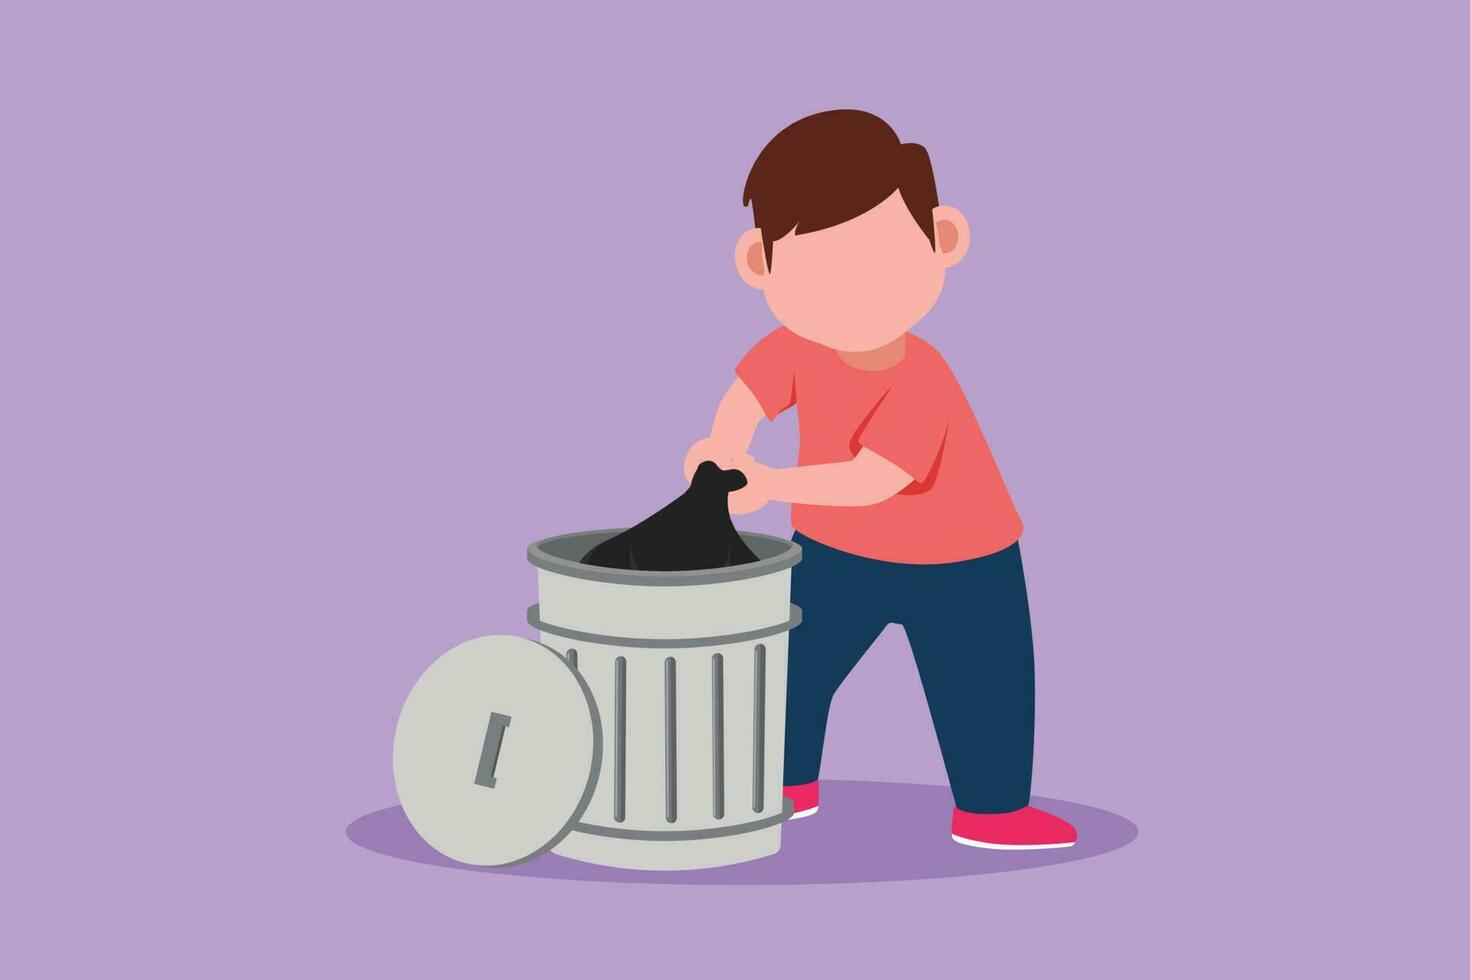 Character flat drawing of adorable little boy taking out the trash. Kids doing housework activities chores at home. Ecology themed campaign. Eco education for kids. Cartoon design vector illustration